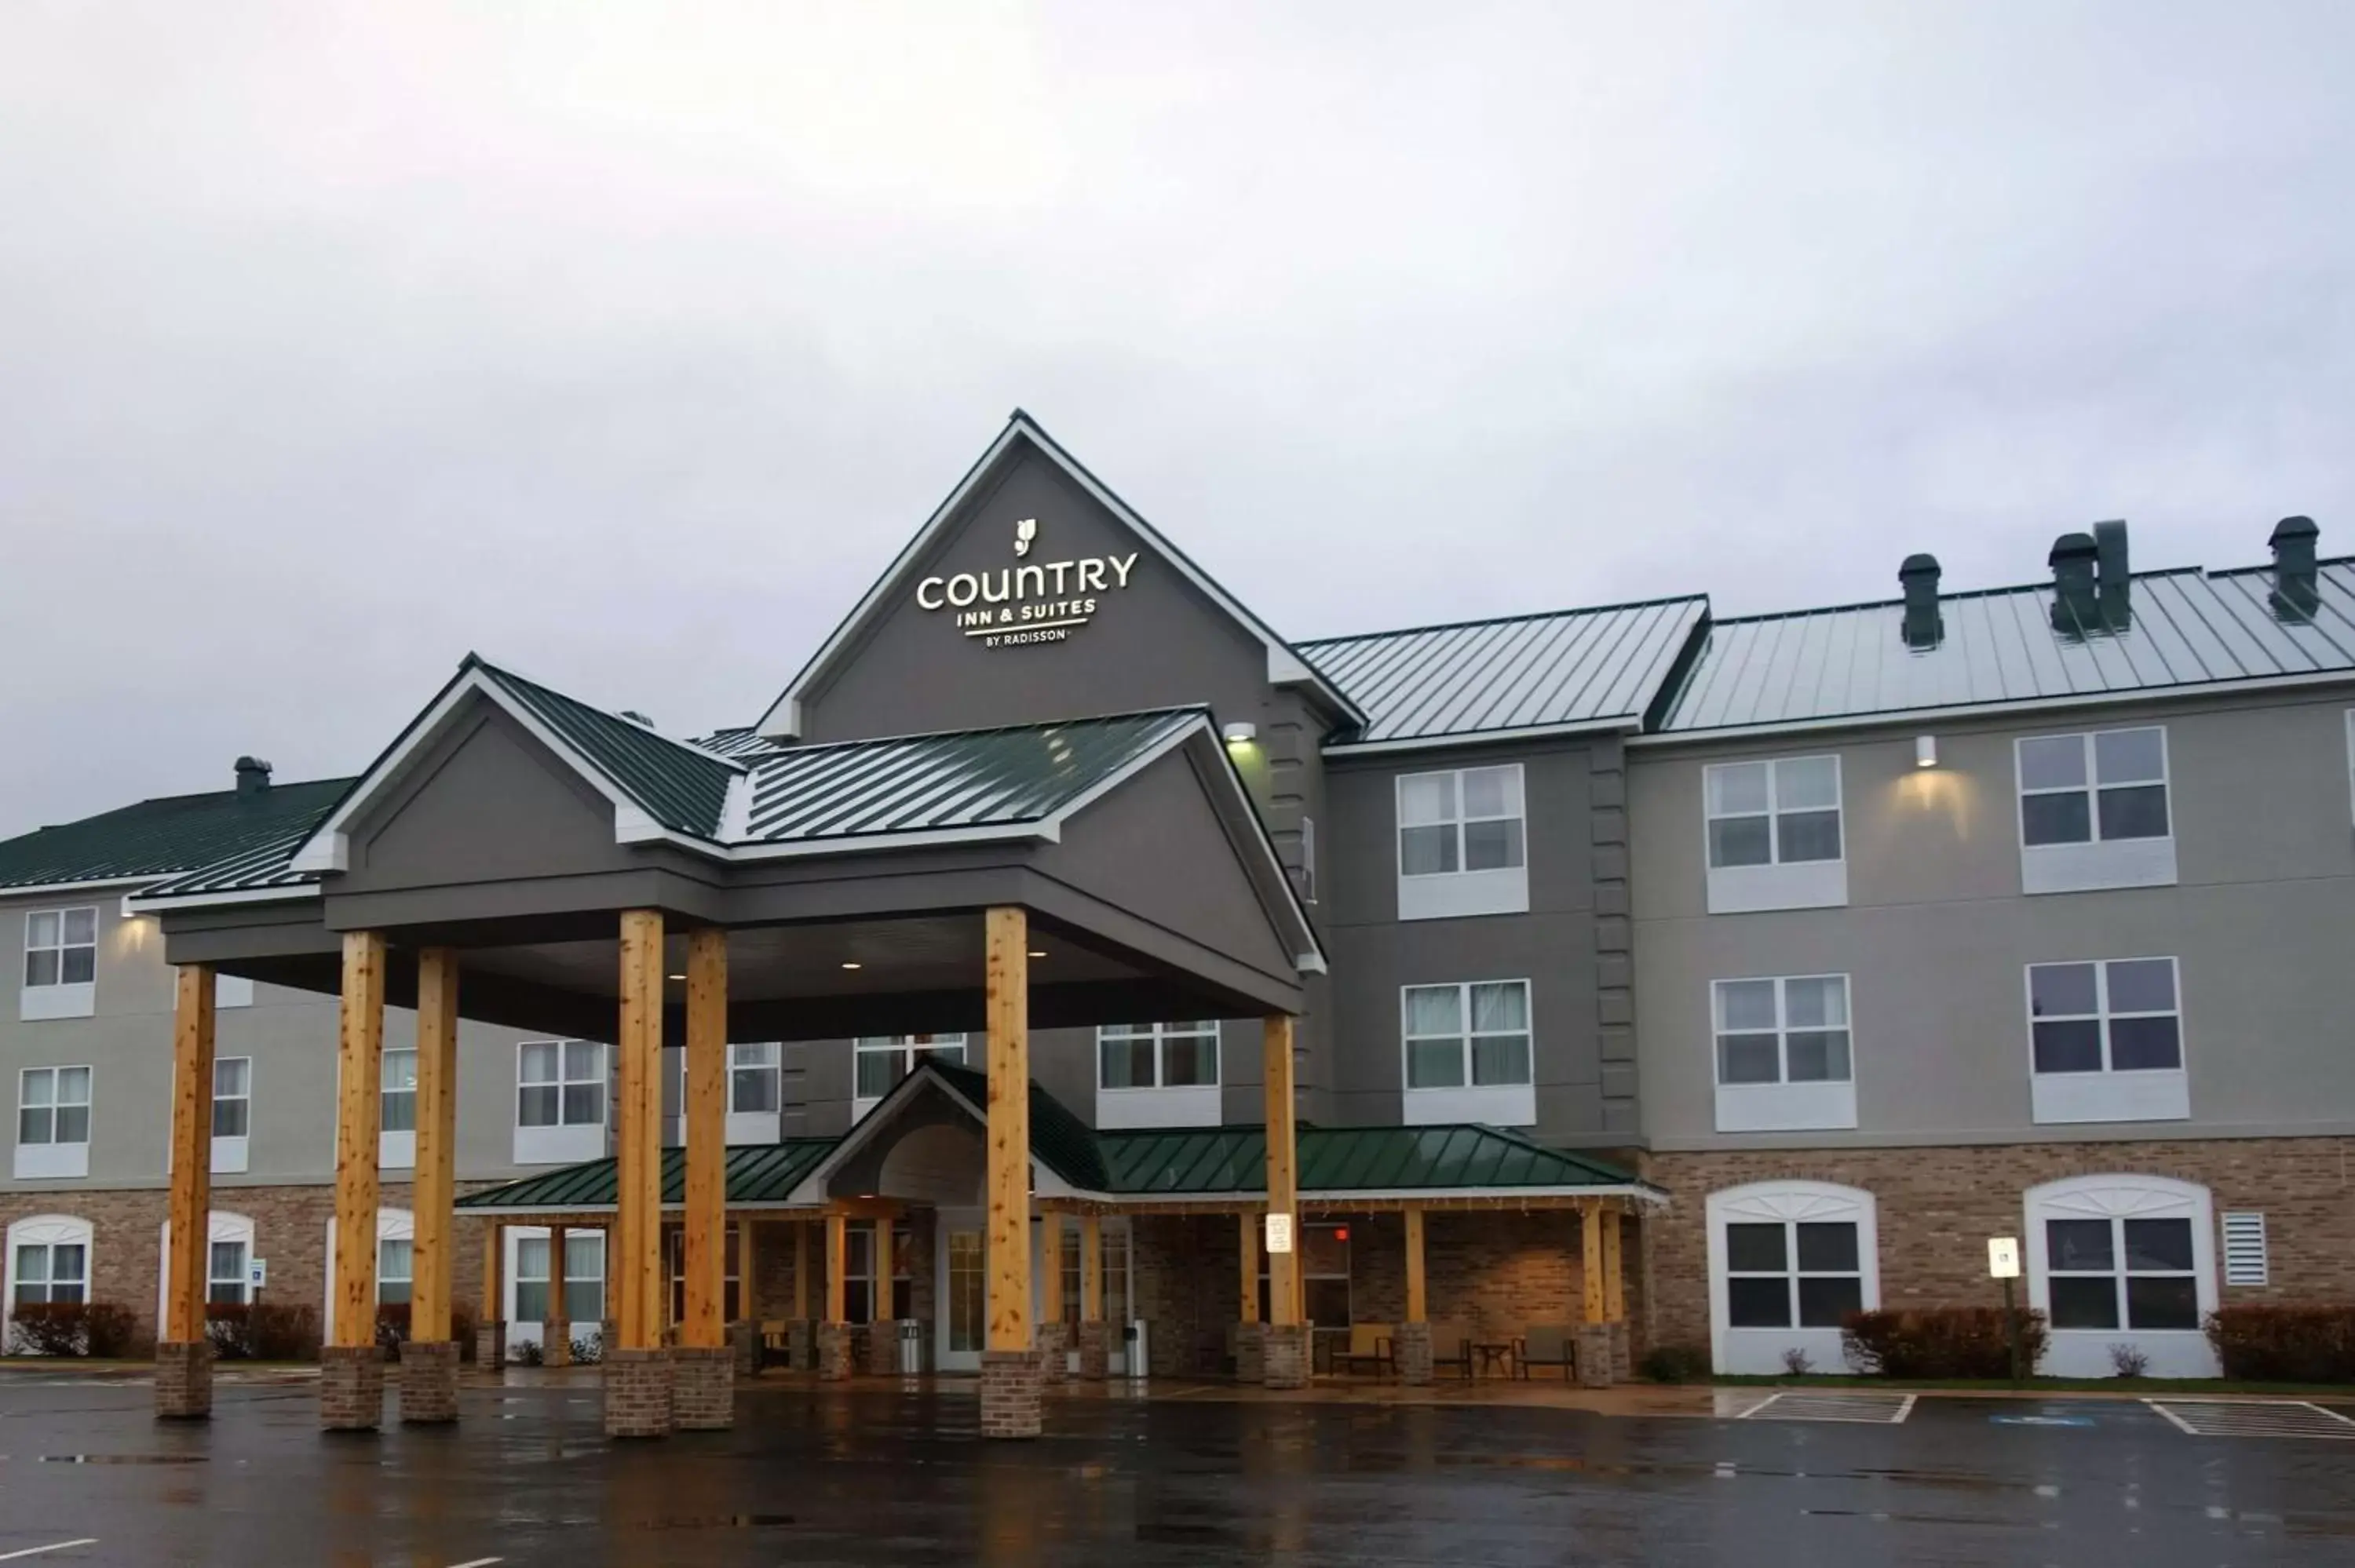 Property building in Country Inn & Suites by Radisson, Houghton, MI